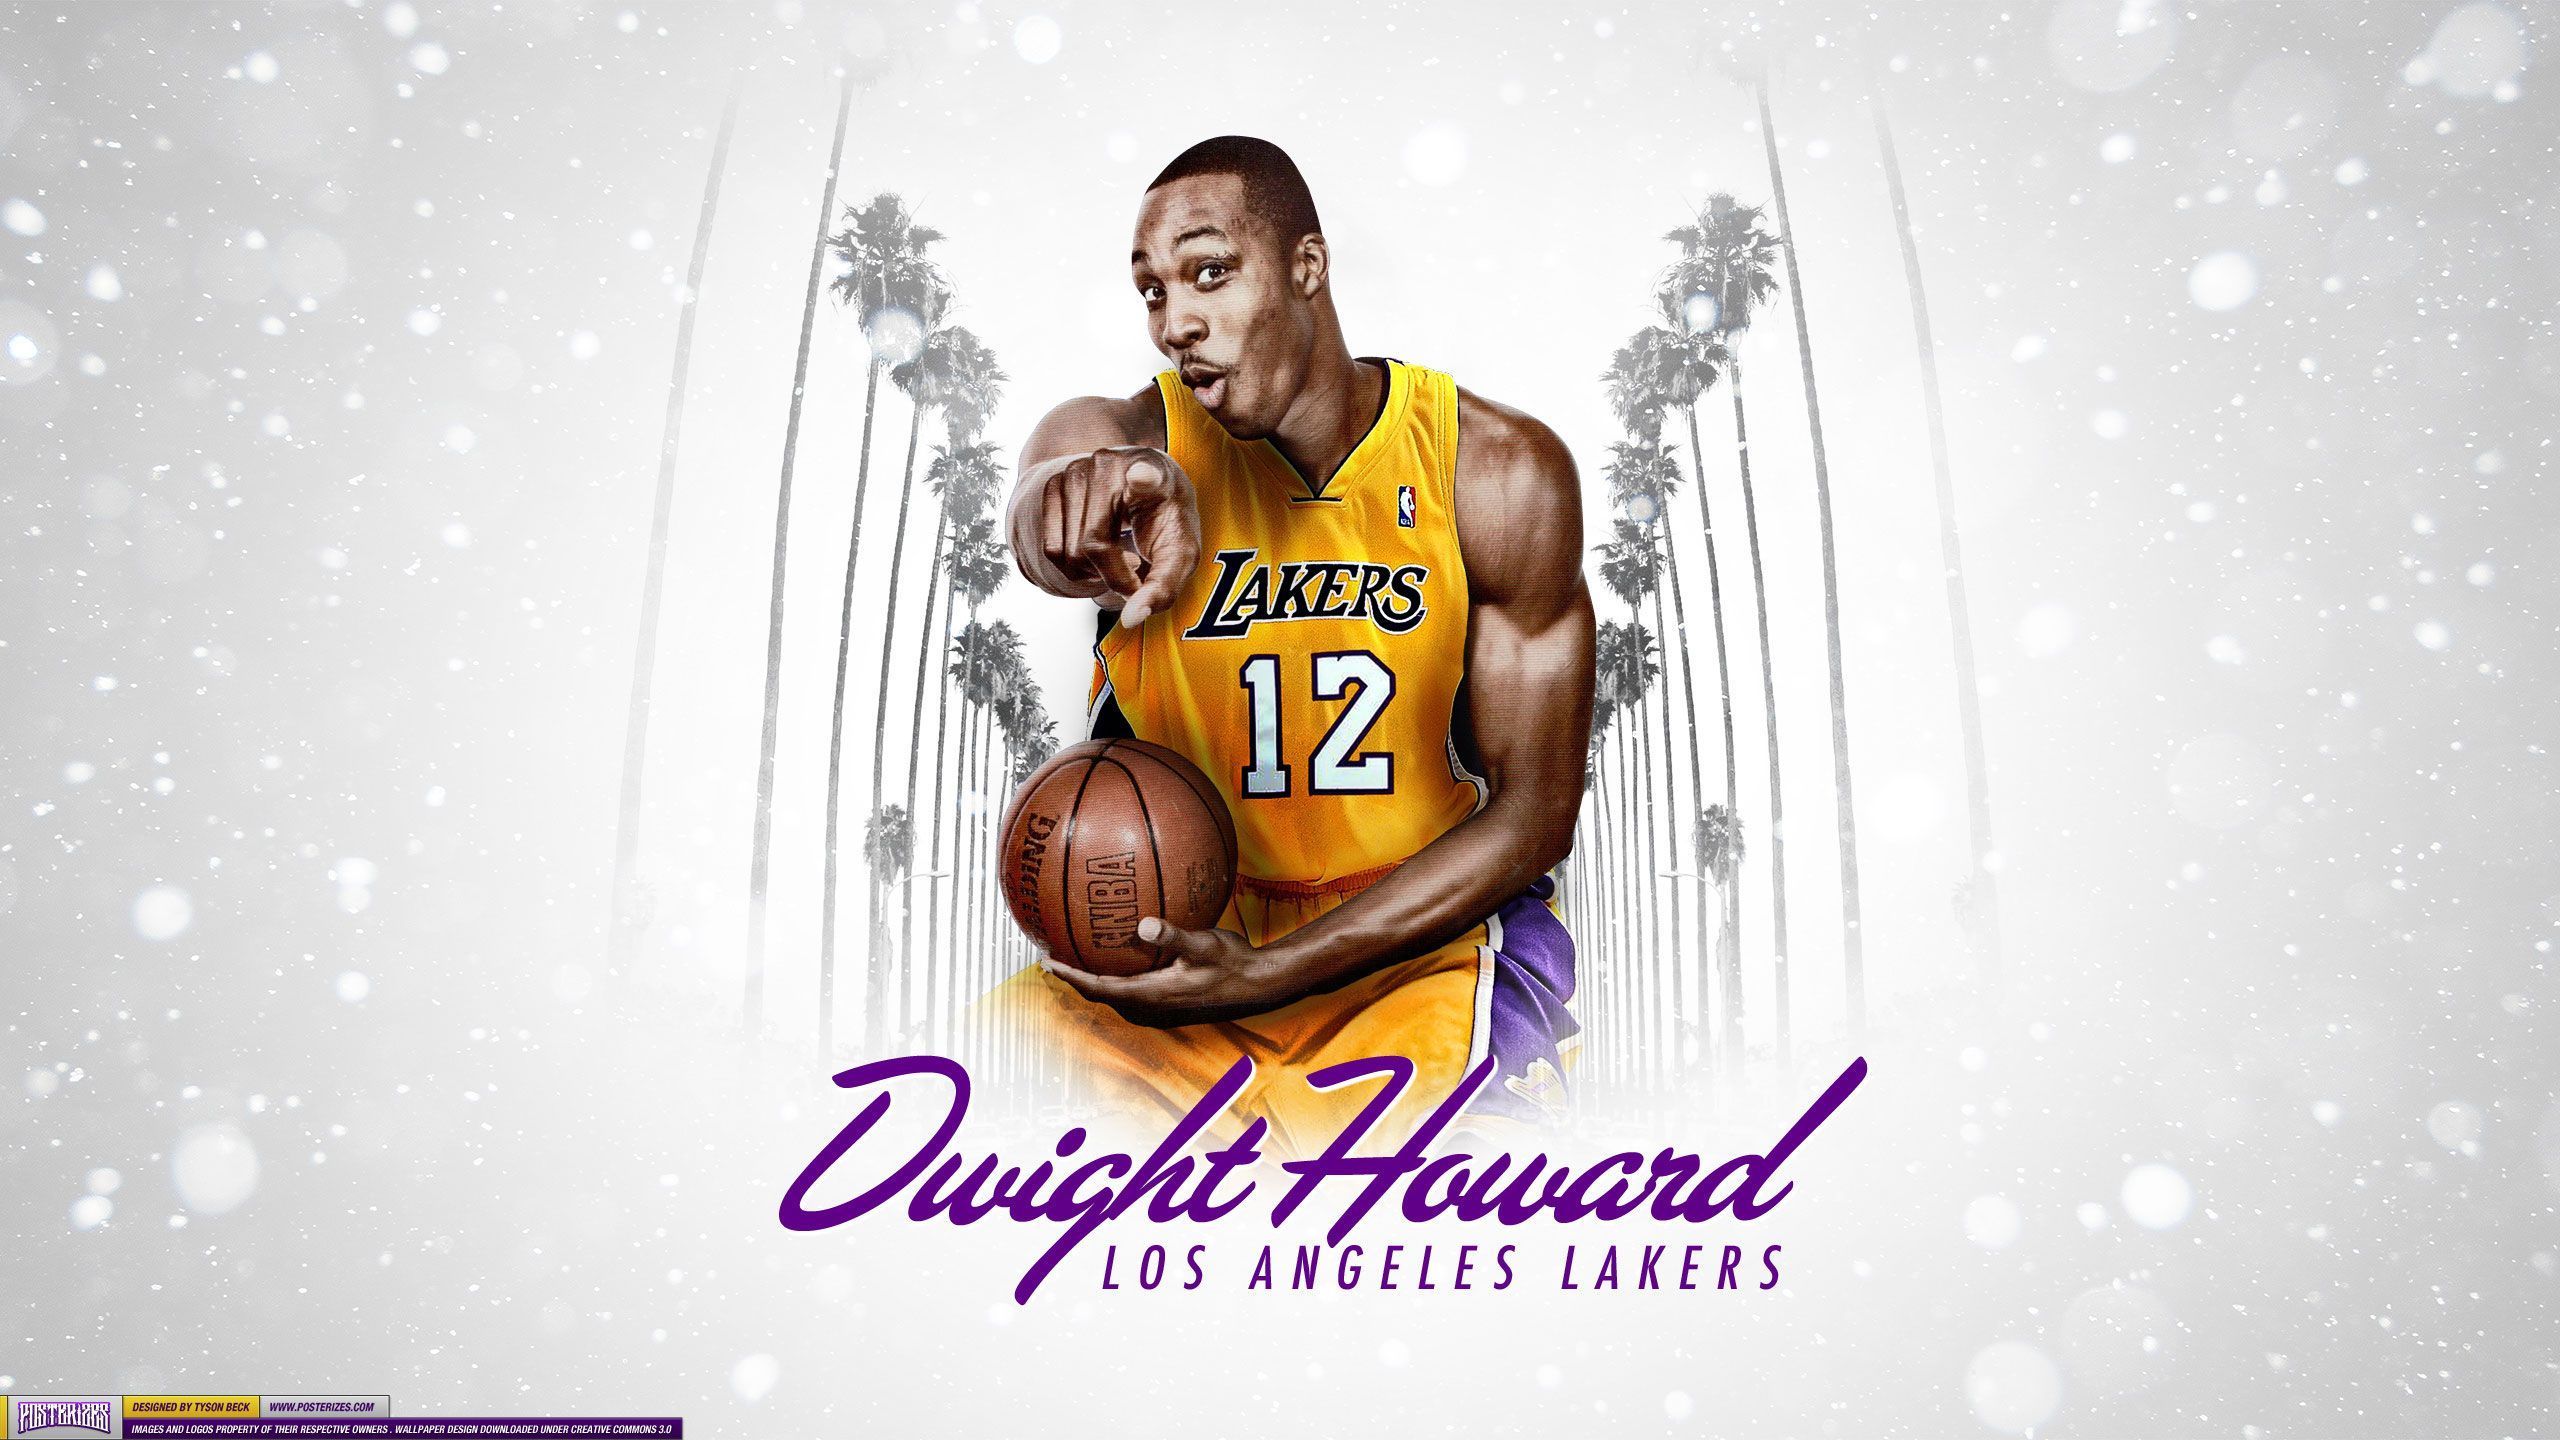 Dwight Howard Lakers wallpaper with the player holding a basketball in his left hand - Los Angeles Lakers